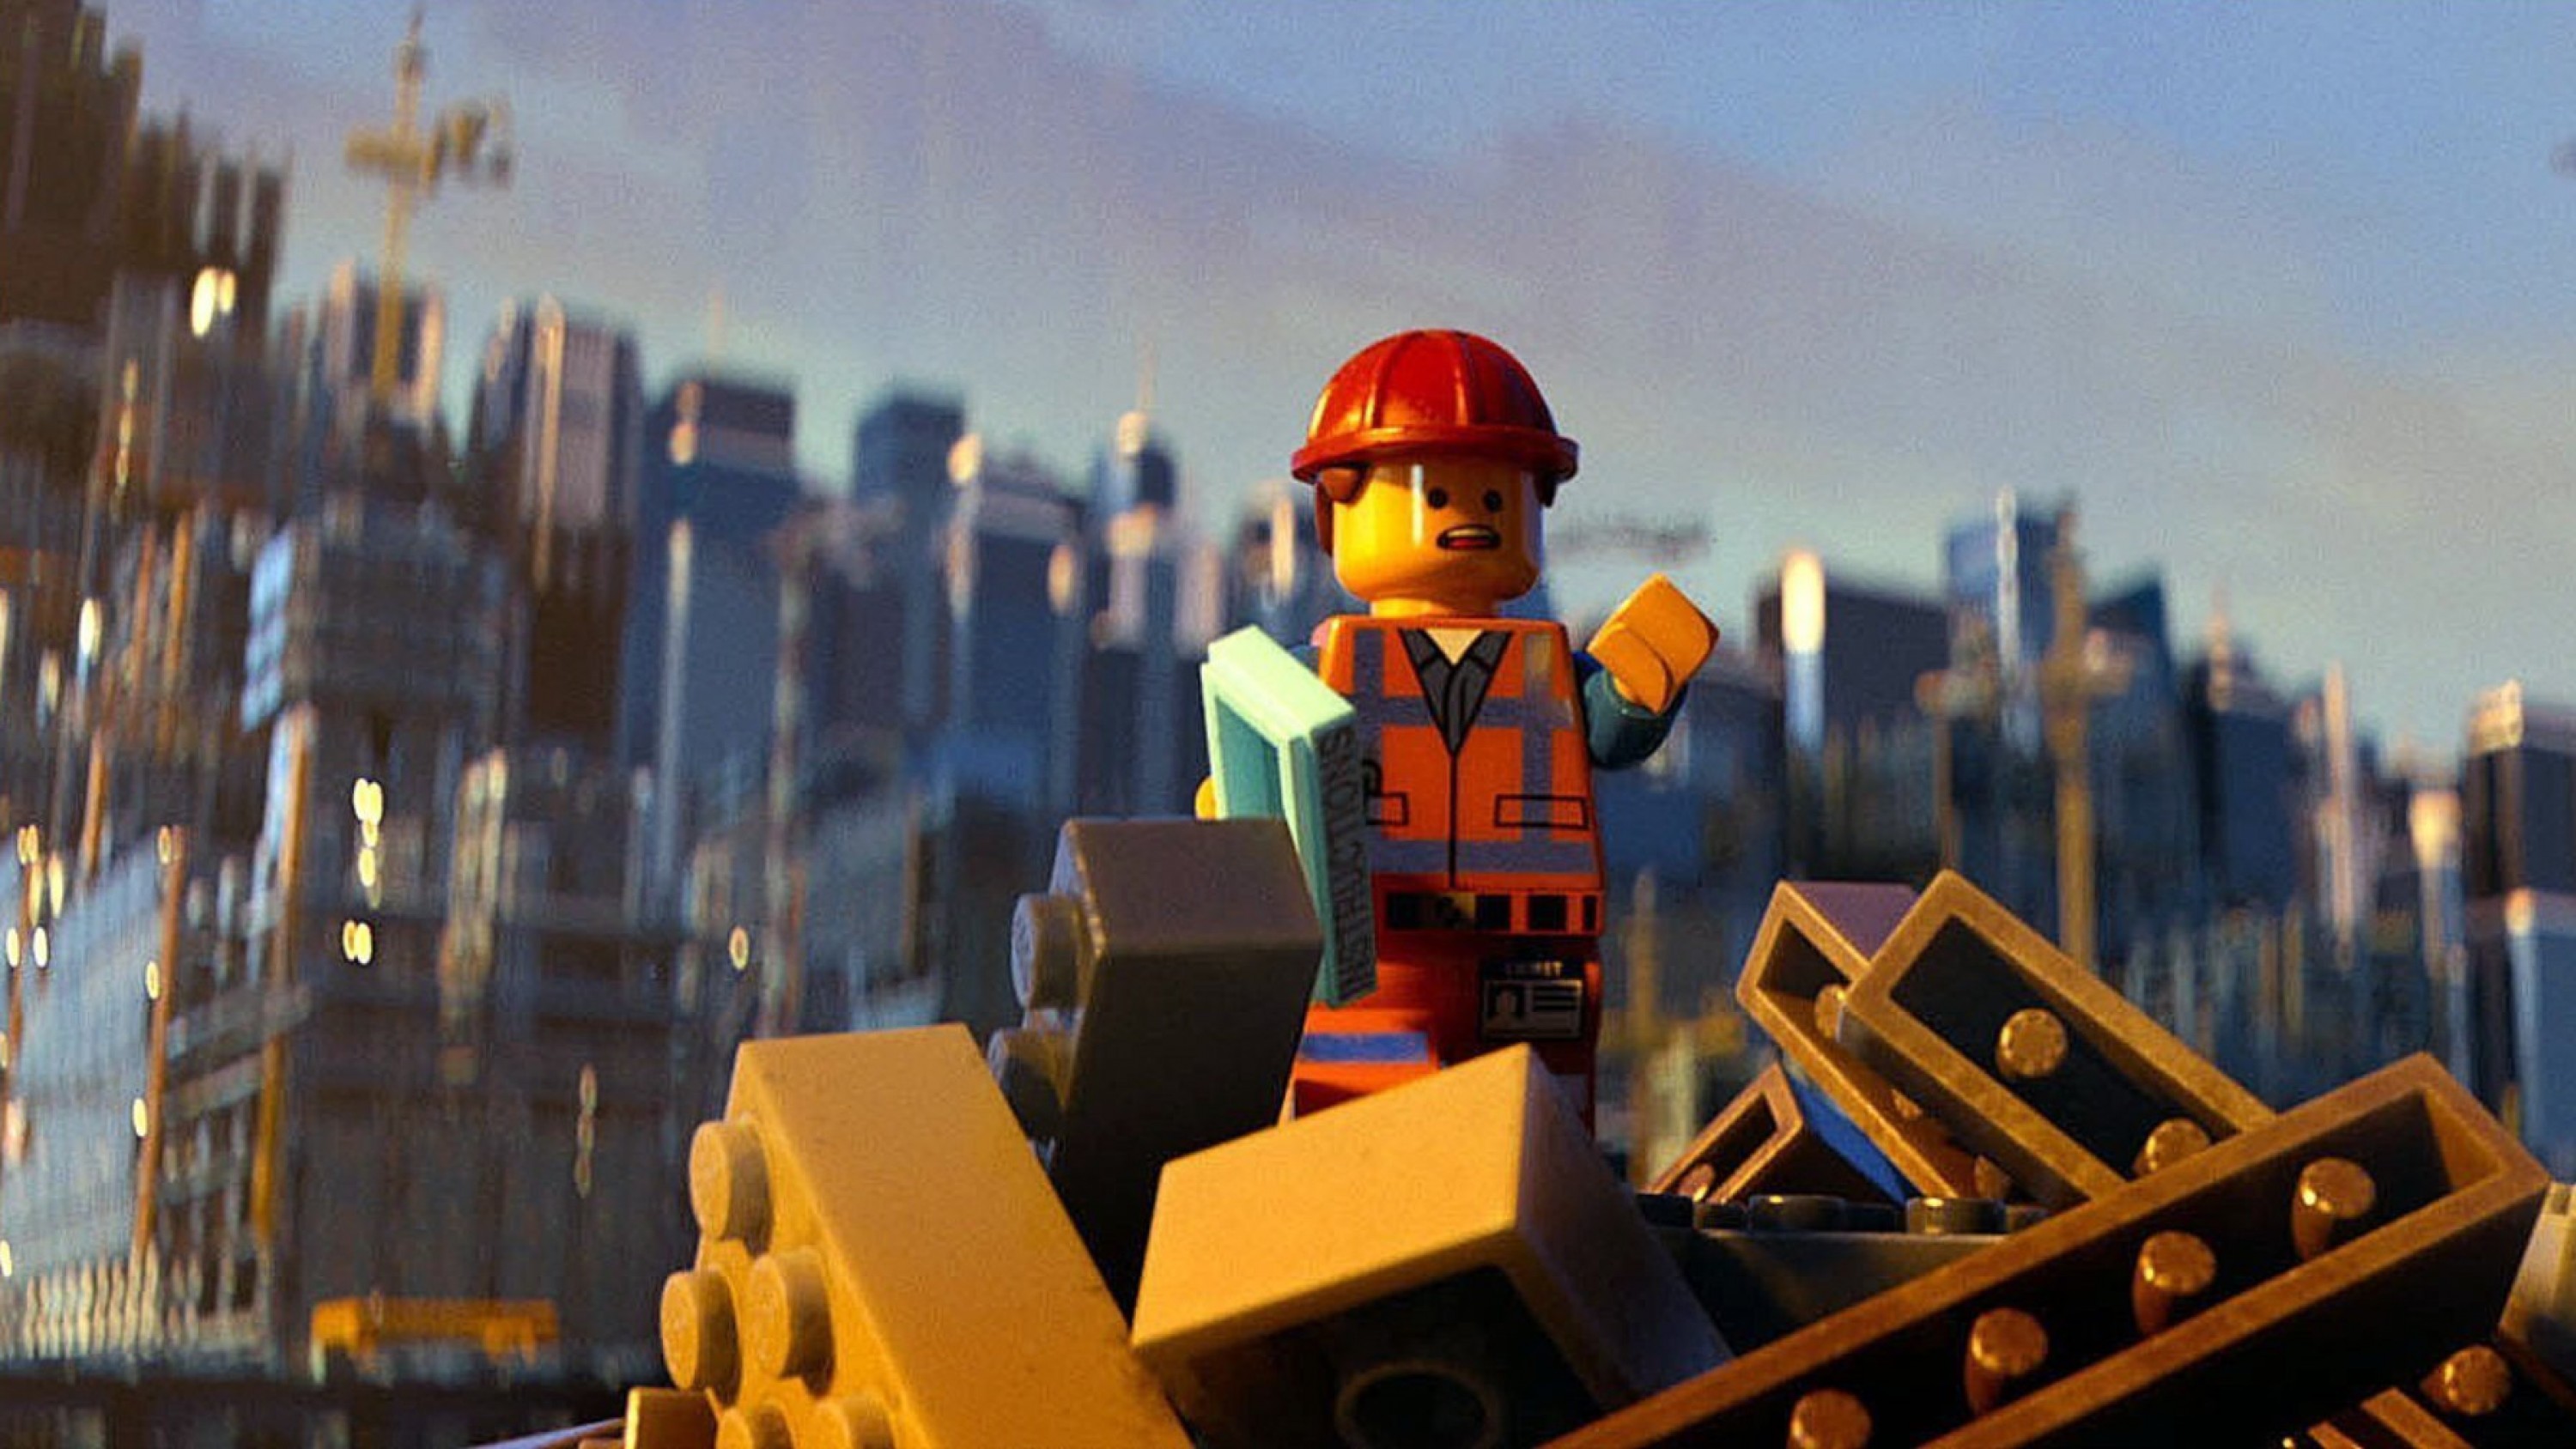 Resource - The LEGO Movie Master Builders - Into Film